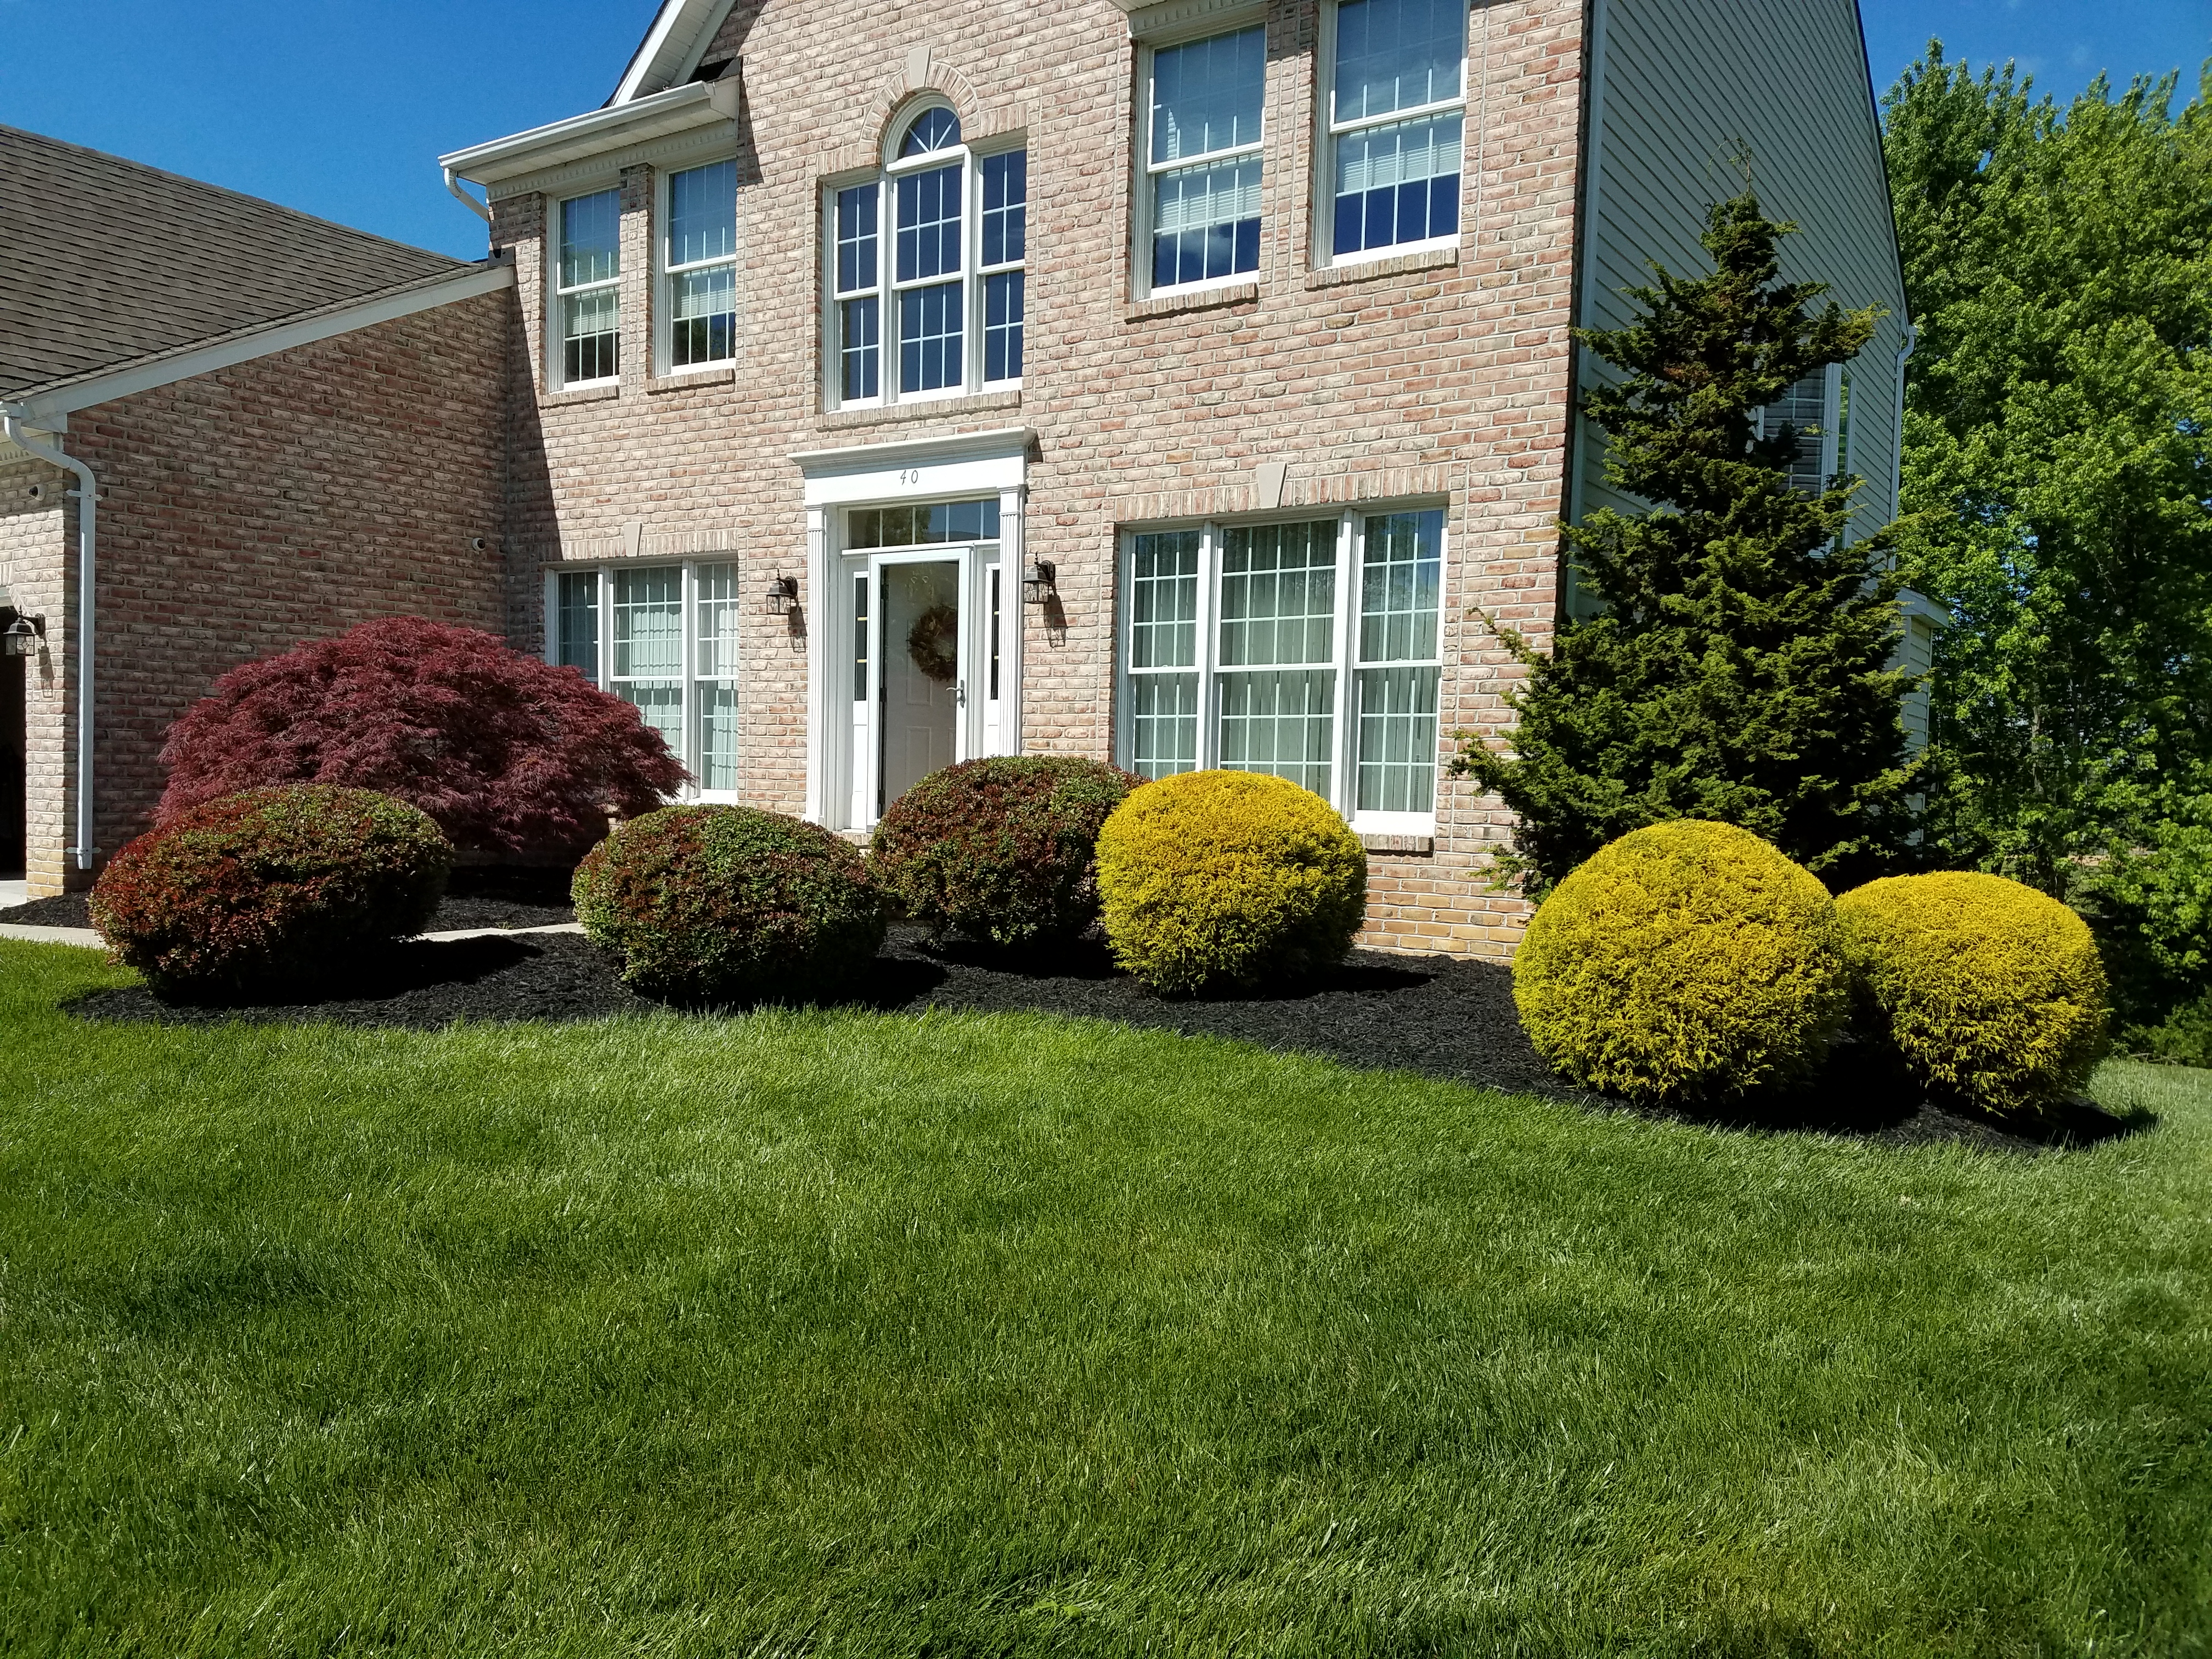 Landscape Design services in harford county